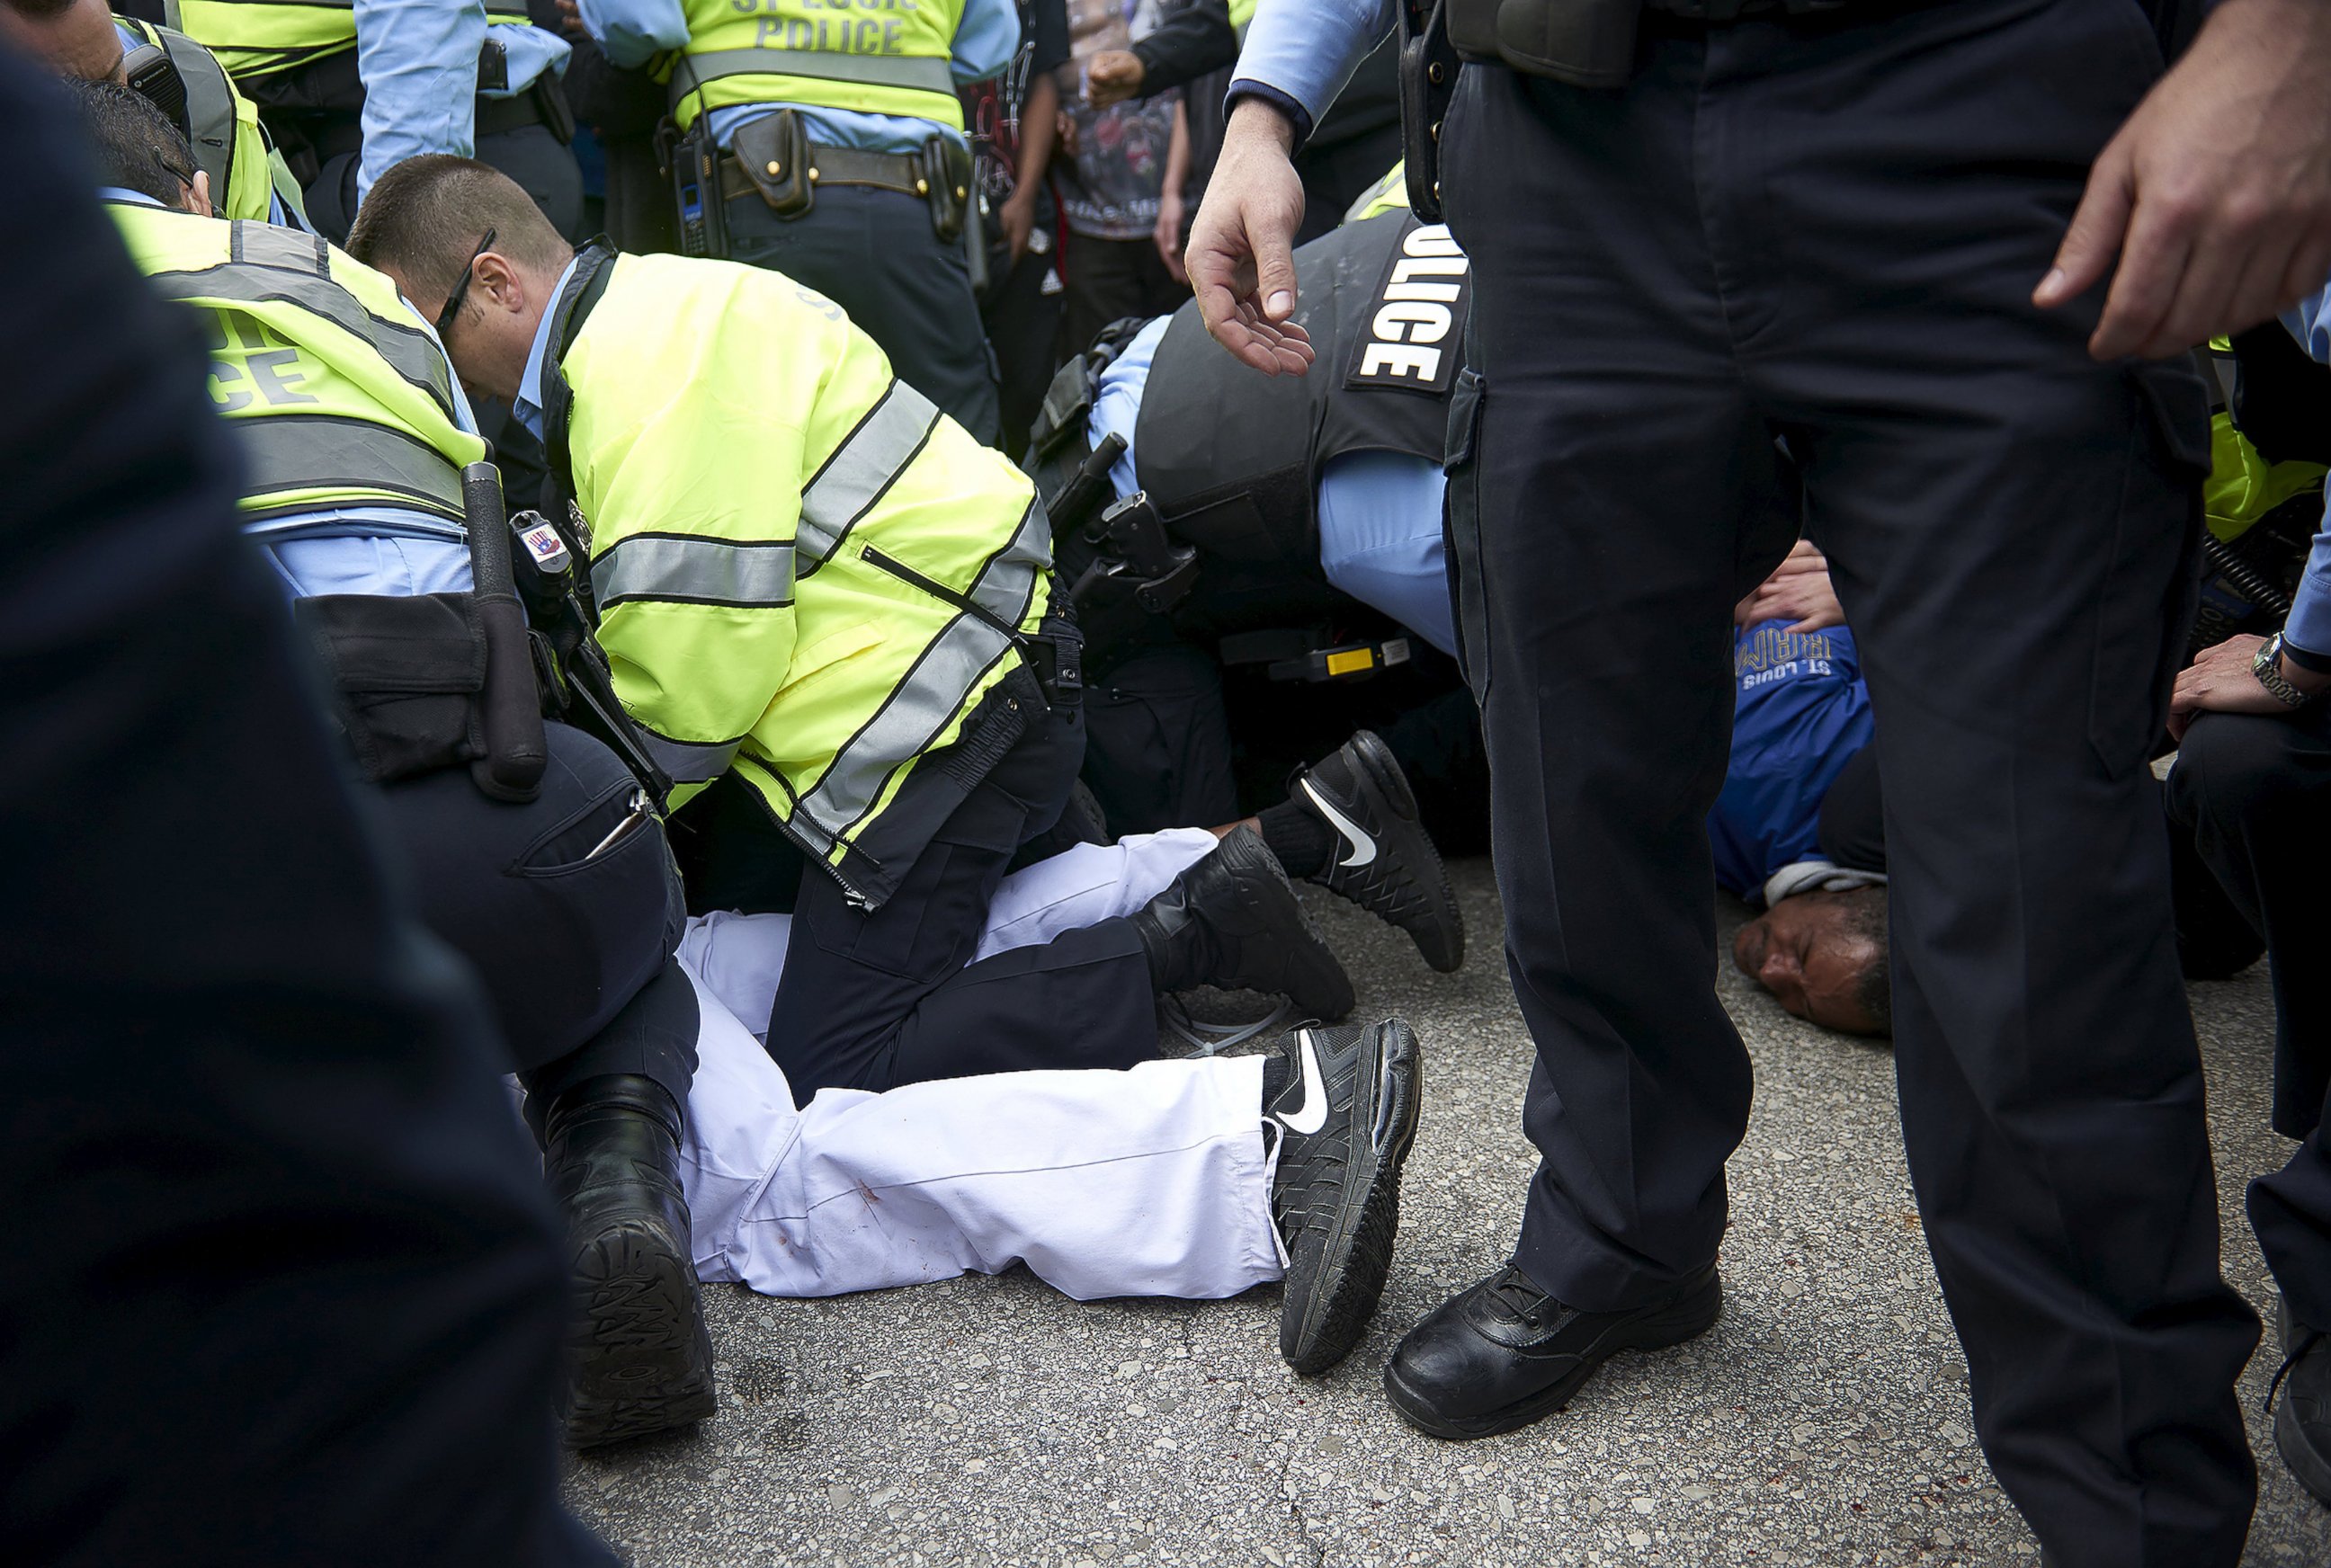 PHOTO: Police detain people after a fight between supporters and opponents of U.S. Republican presidential candidate Donald Trump, ahead of his speech outside the Peabody Opera House in St. Louis, Missouri, March 11, 2016.